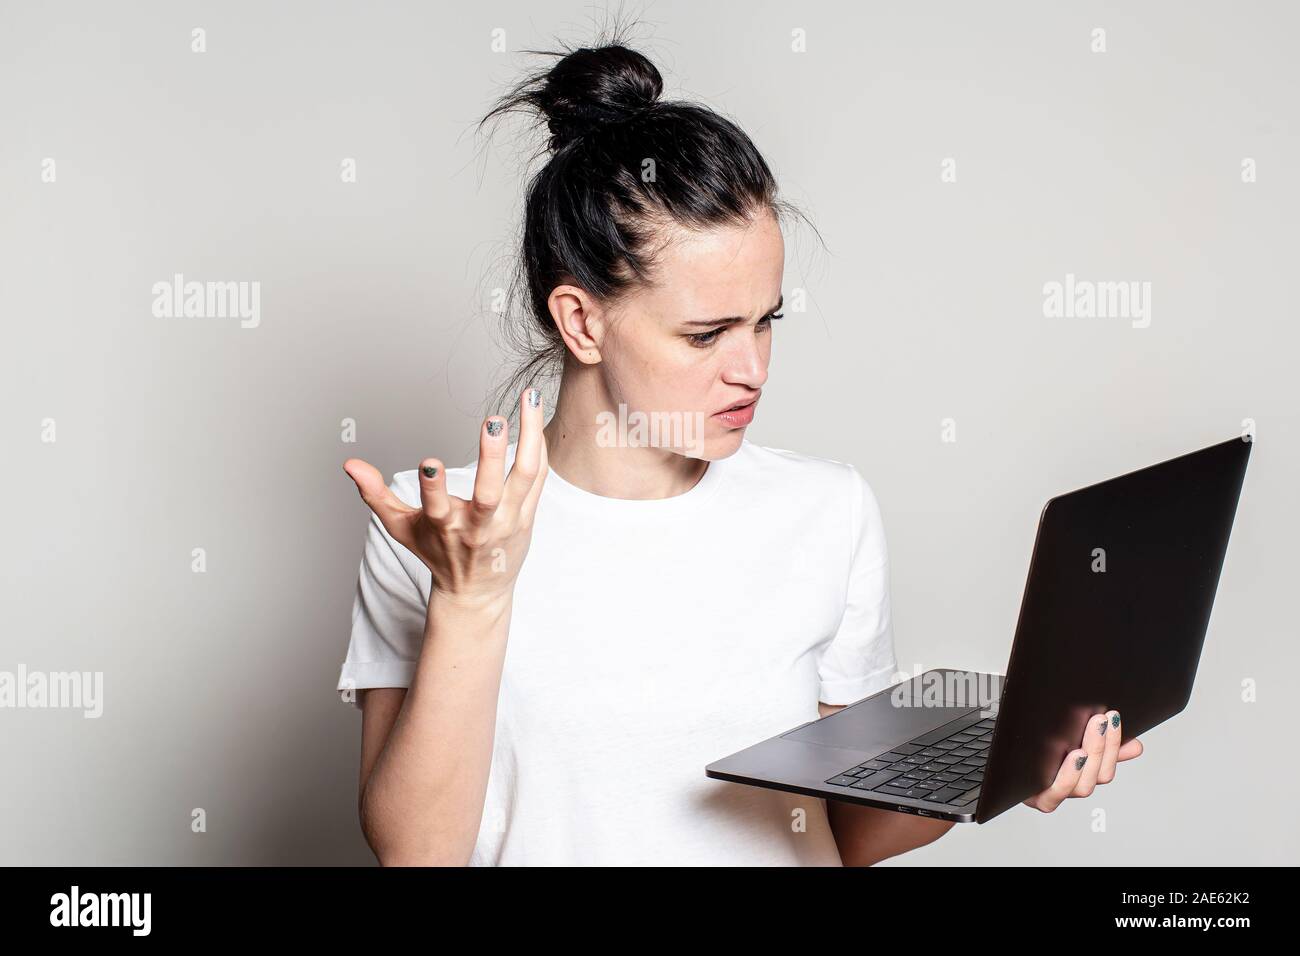 Student upset, bewildered looks at his laptop, frowns and makes a gesture with hand. Stock Photo